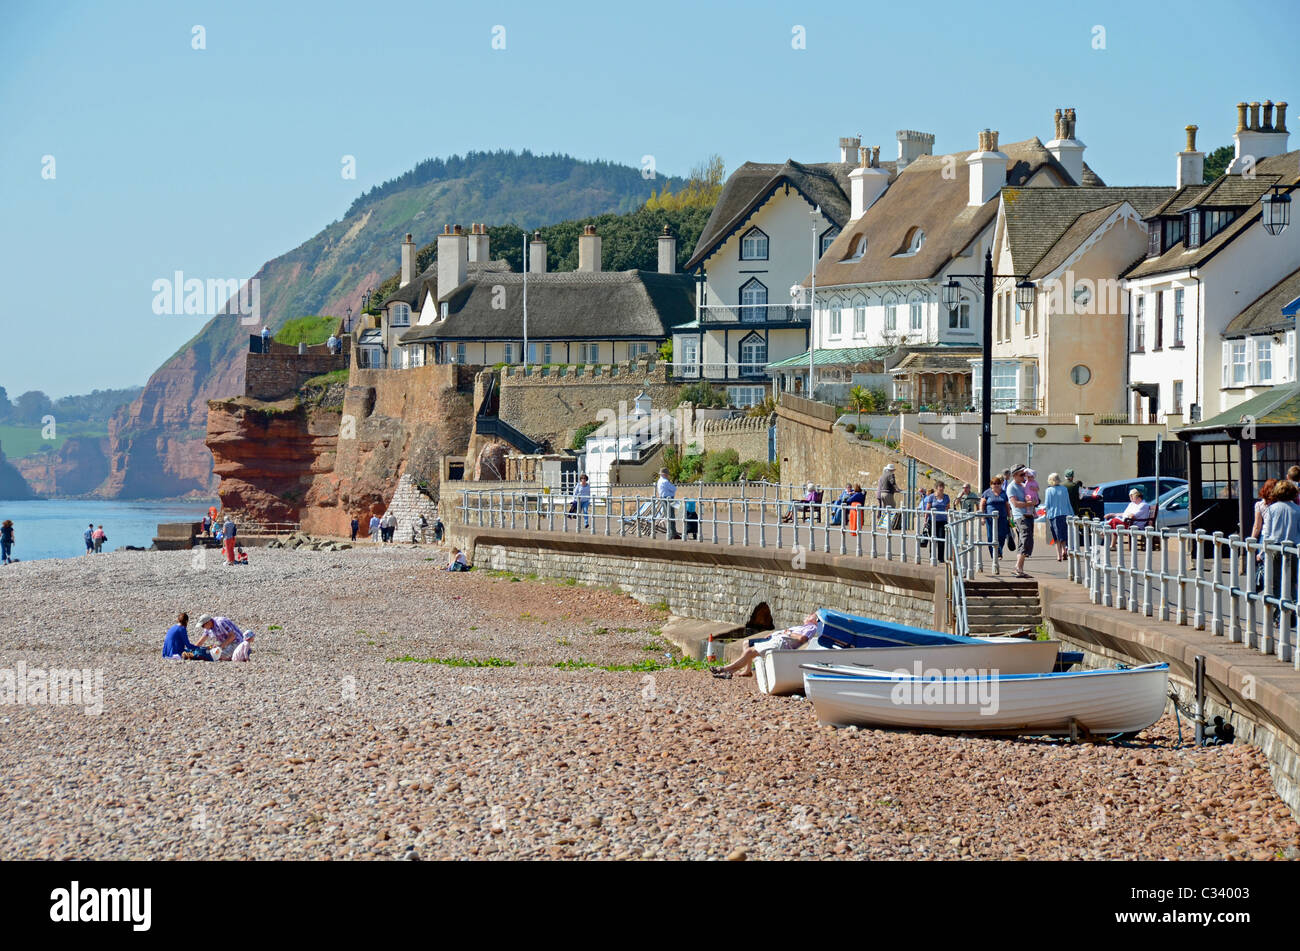 Beach And Thatched Cottages Sidmouth Devon England Uk Stock